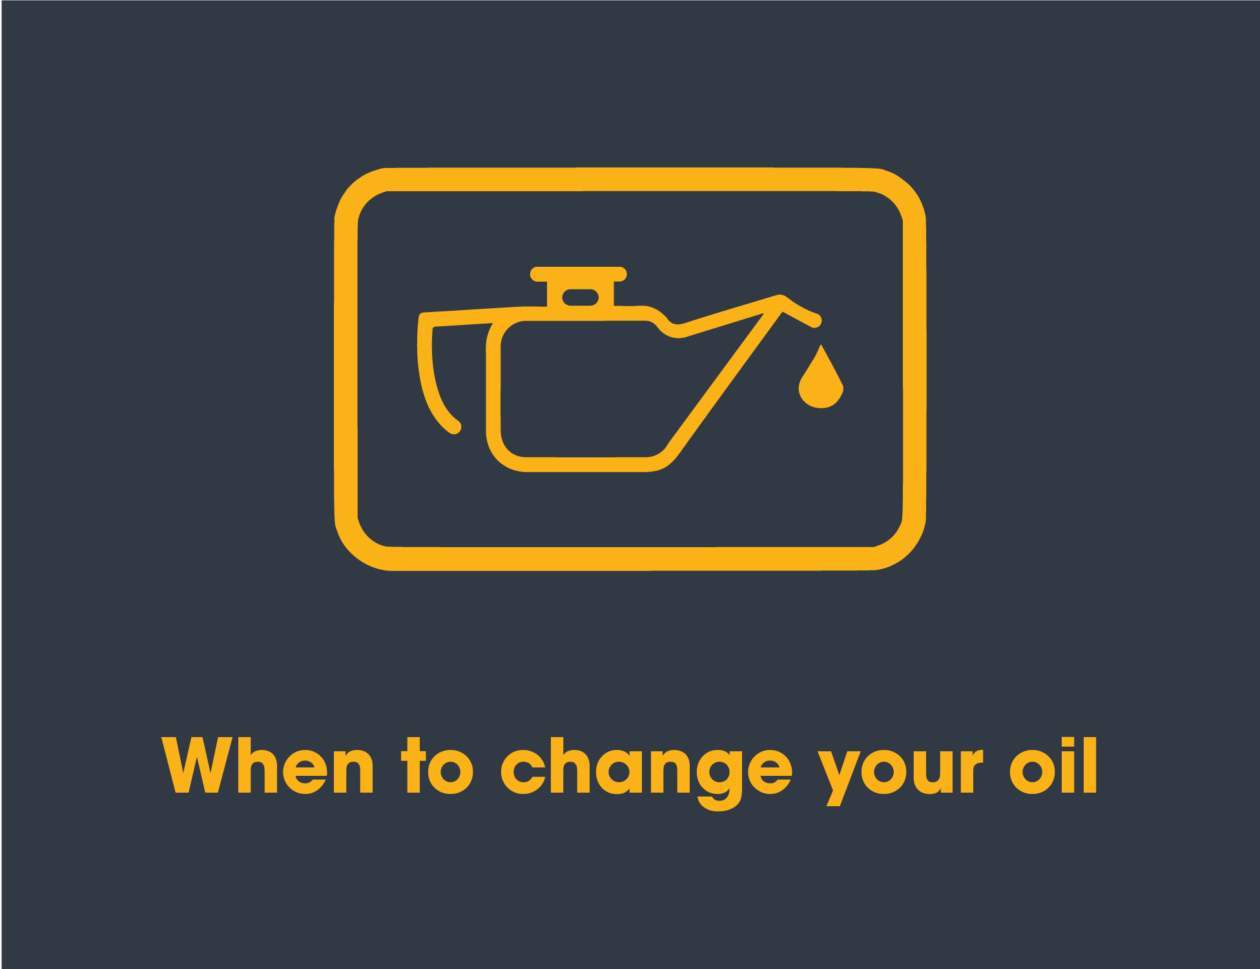 When to get an oil change